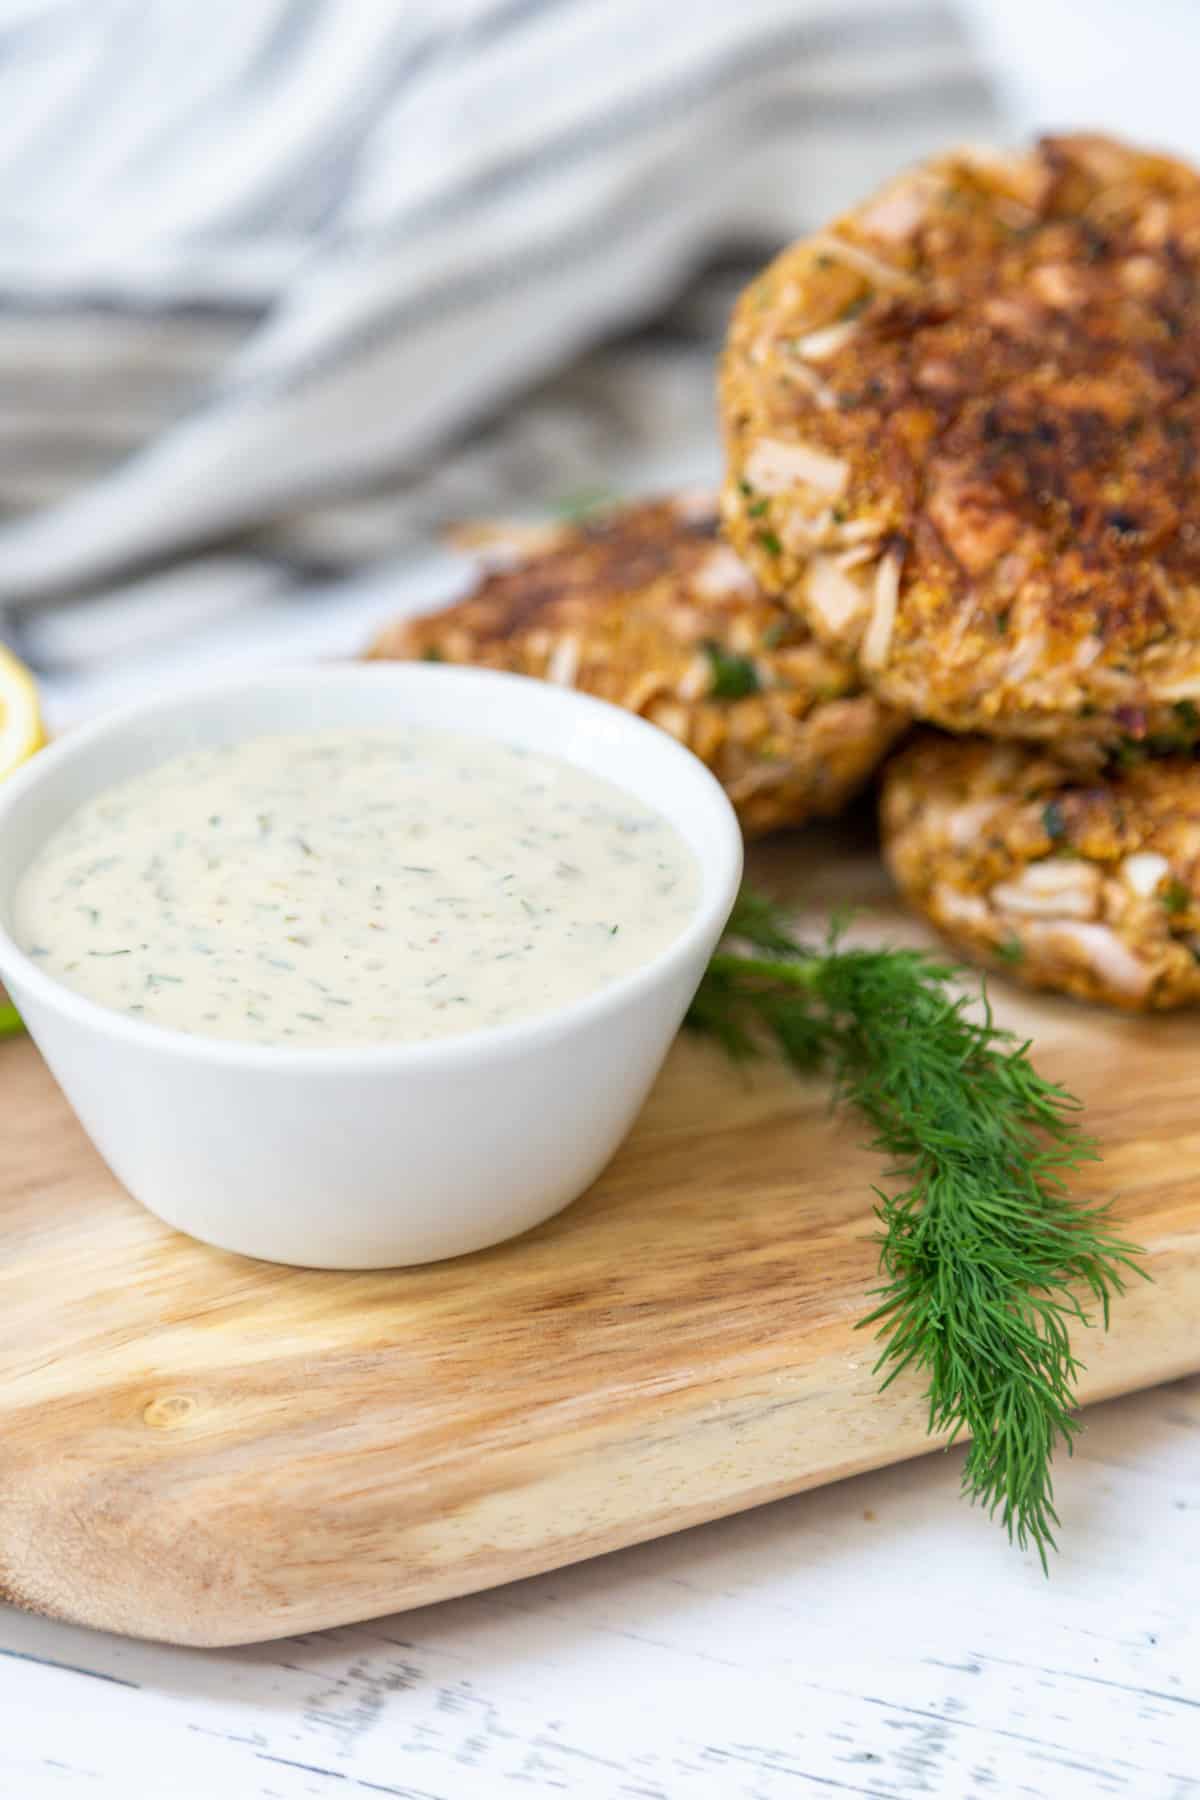 Crab cakes on a wooden board with a white dish of tartar sauce.